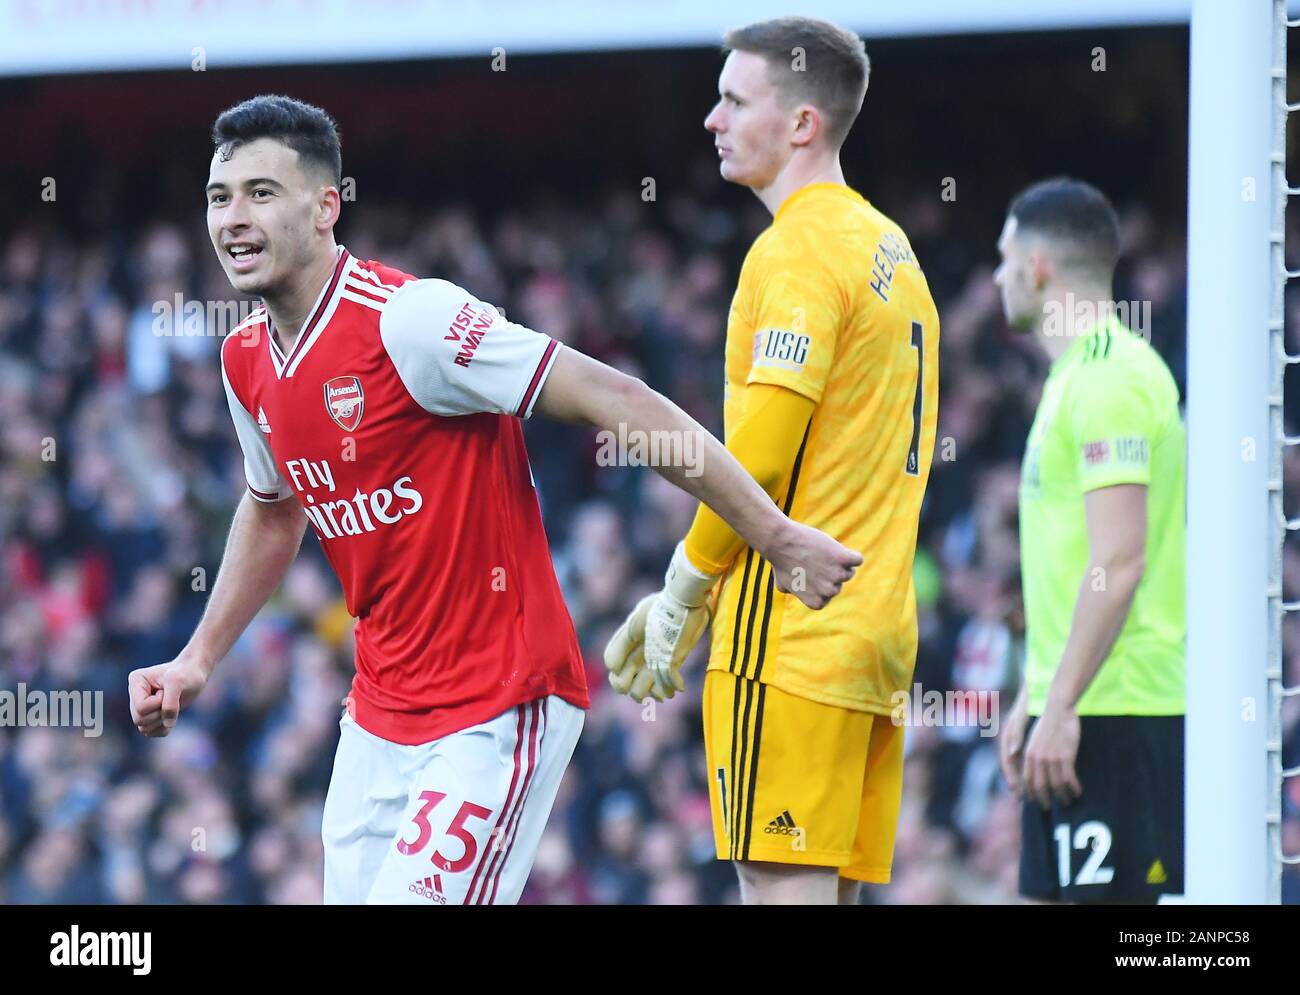 LONDON, ENGLAND - JANUARY 18, 2020: Gabriel Martinelli of Arsenal celebrates after he scored a goal during the 2019/20 Premier League game between Arsenal FC and Sheffield United FC at Emirates Stadium. Stock Photo